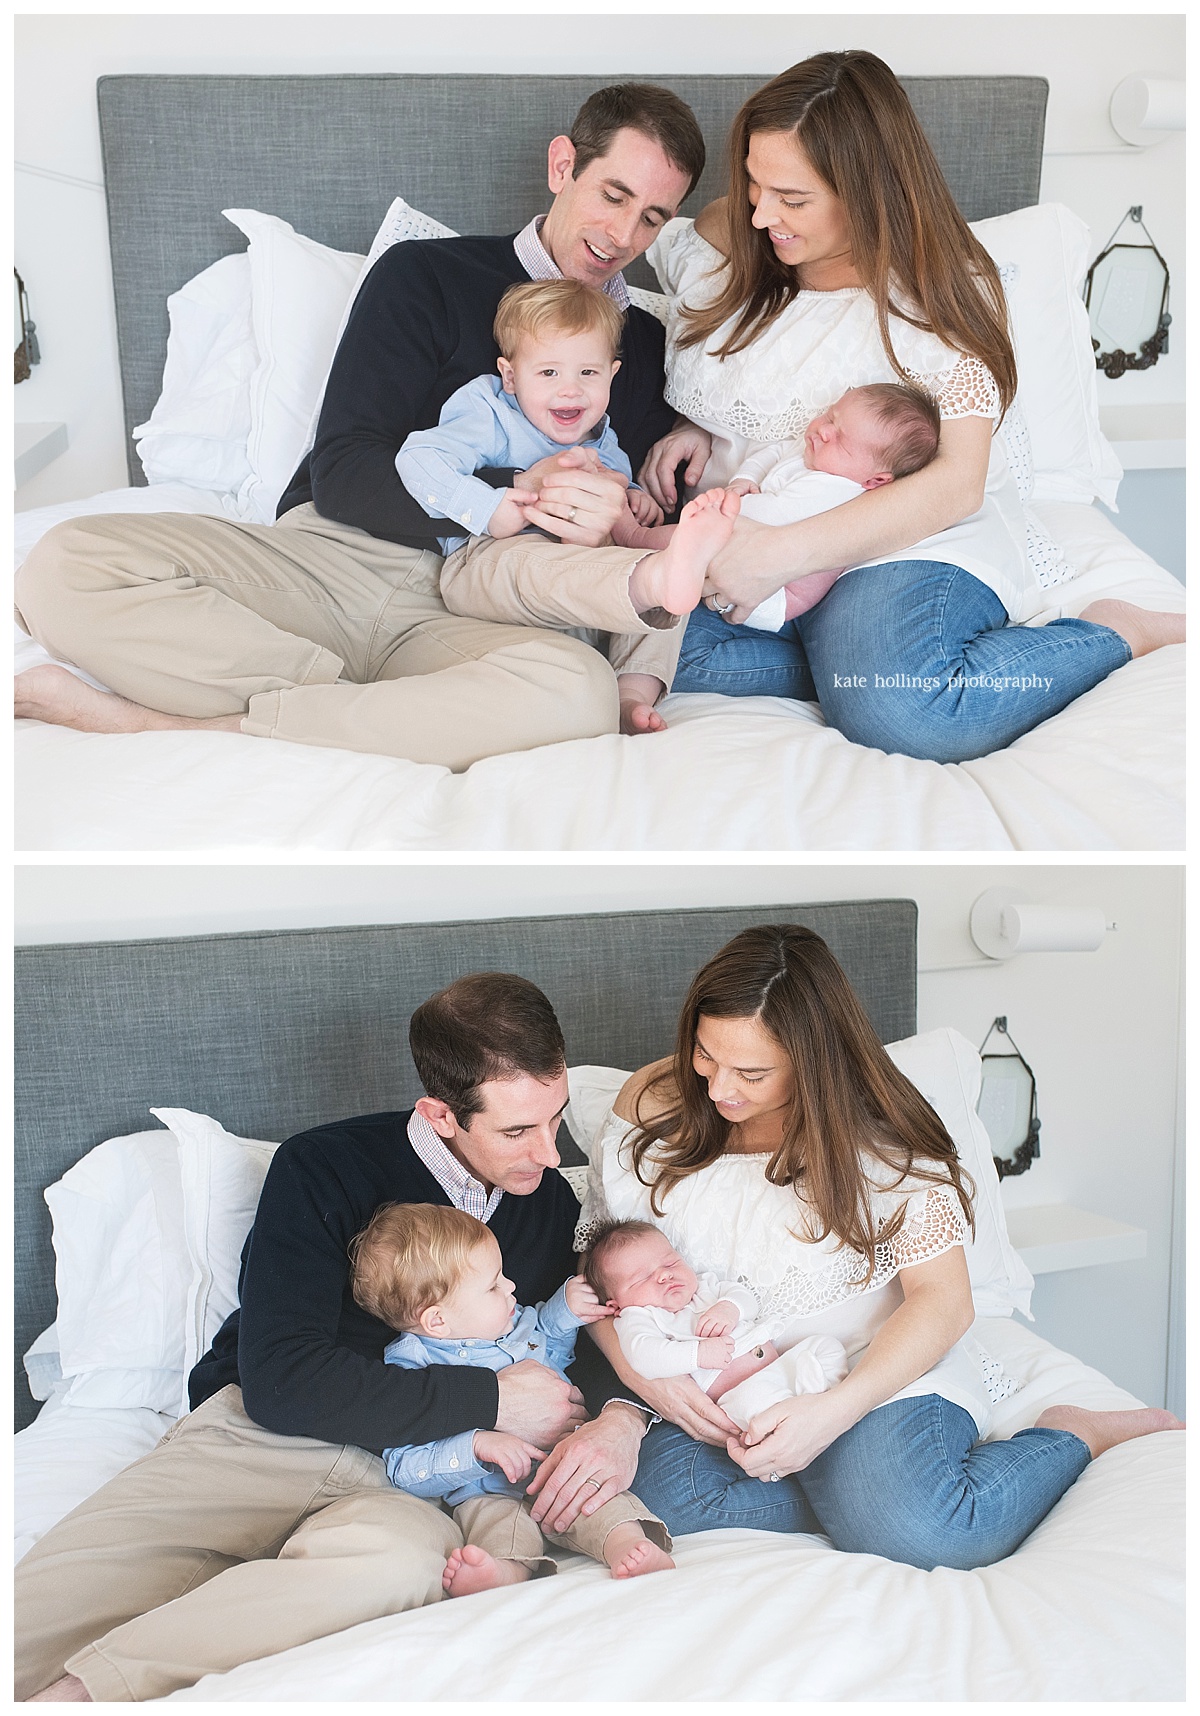 Family gathers in newborn lifestyle session at home